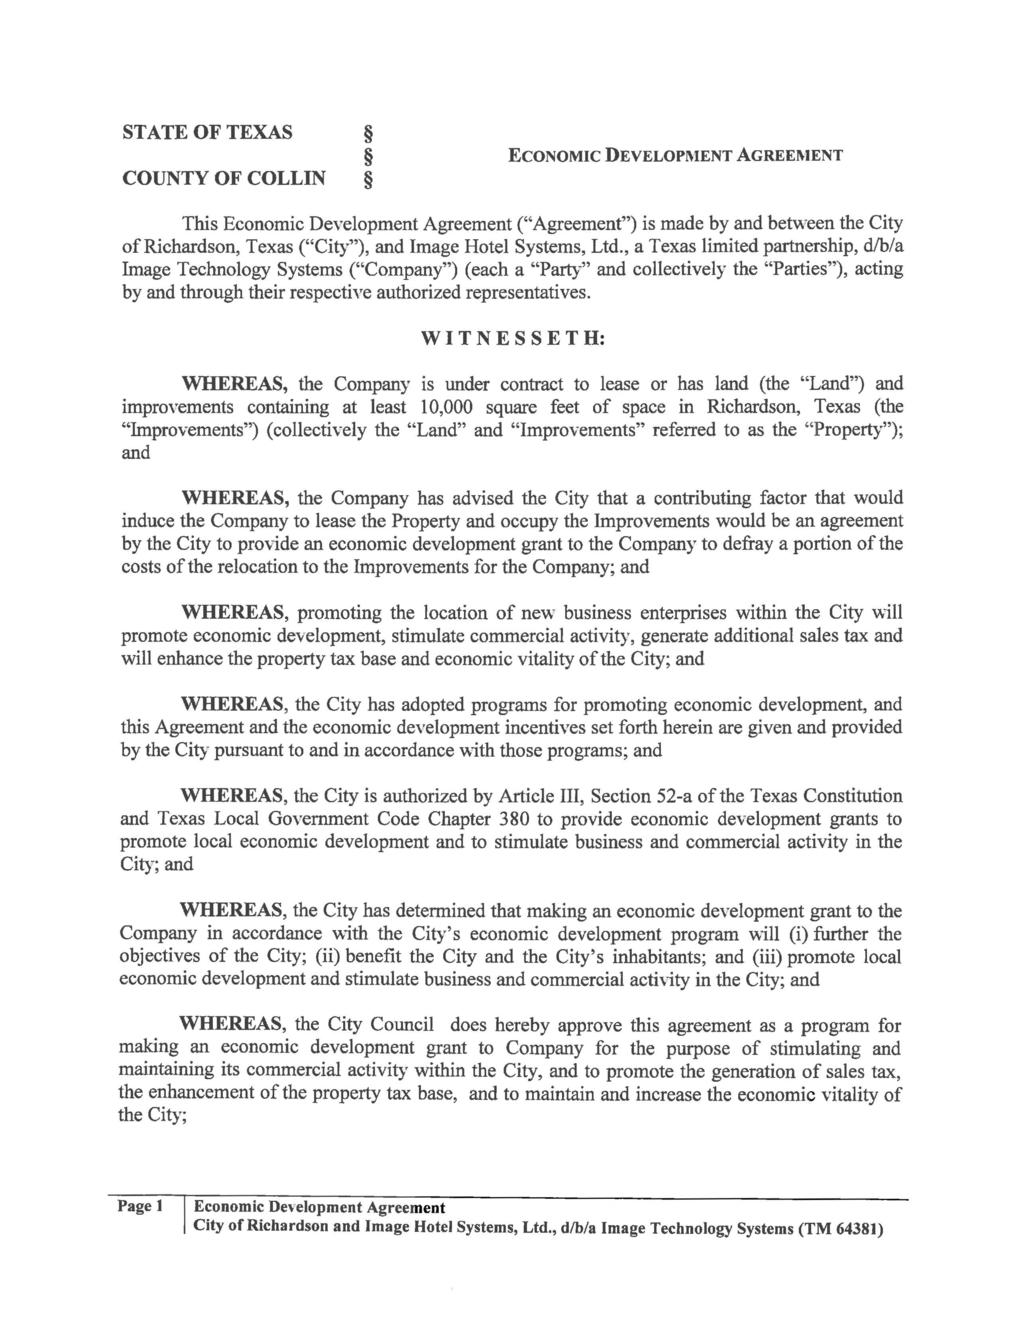 STATE OF TEXAS COUNTY OF COLLIN ECONOMIC DEVELOPMENT AGREEMENT This ("Agreement") is made by and between the City of Richardson, Texas ("City"), and Image Hotel Systems, Ltd.